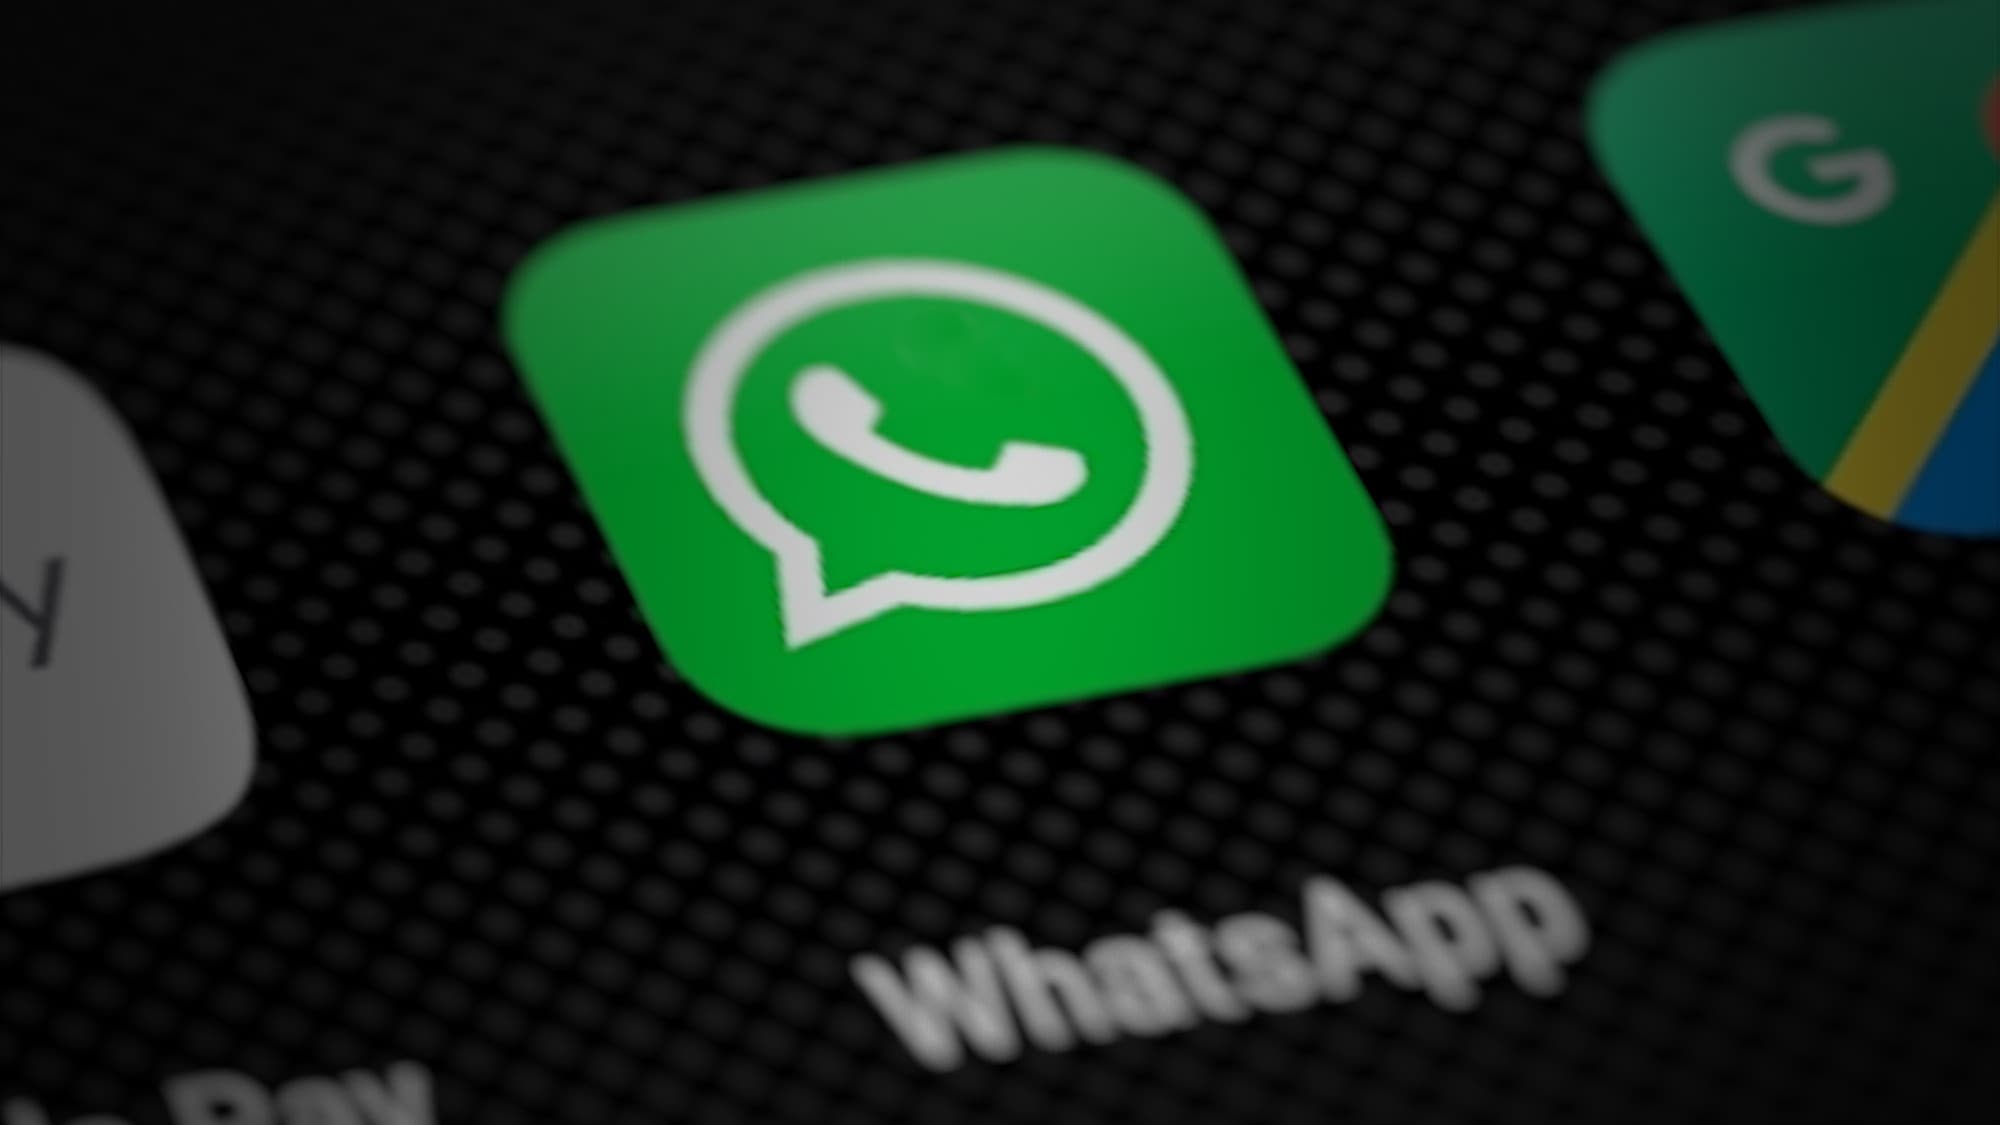 Whatsapp is setting up a function similar to Apple's Airdrop